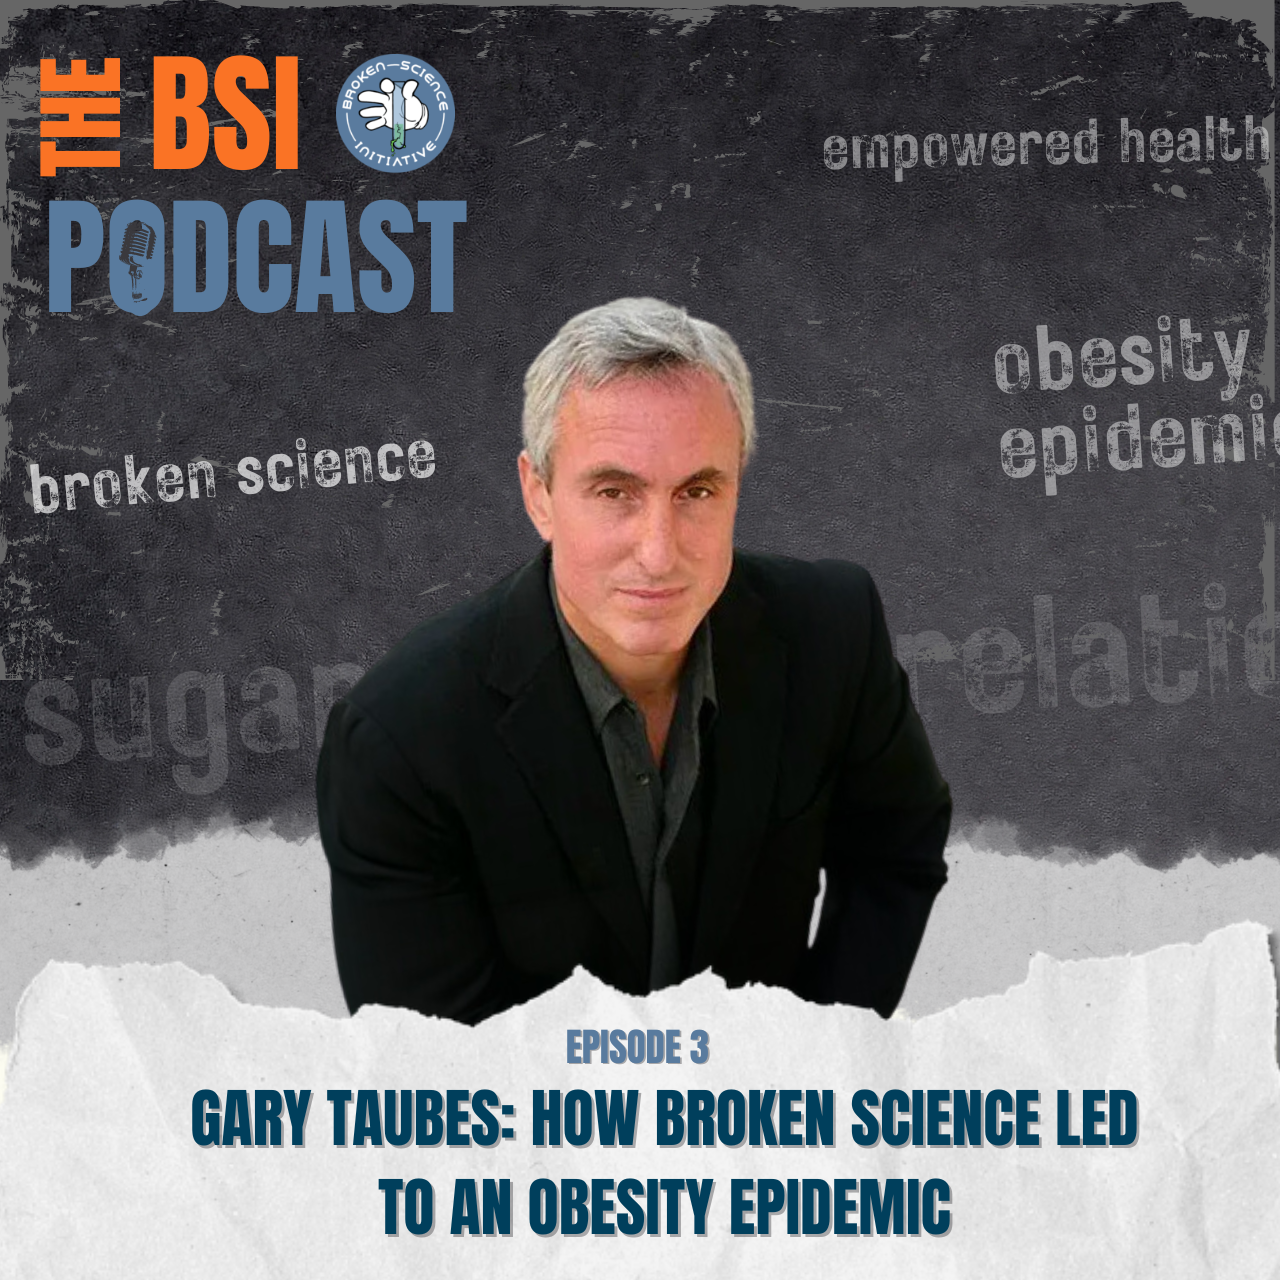 Ep 3: Gary Taubes - How Broken Science Led to an Obesity Epidemic